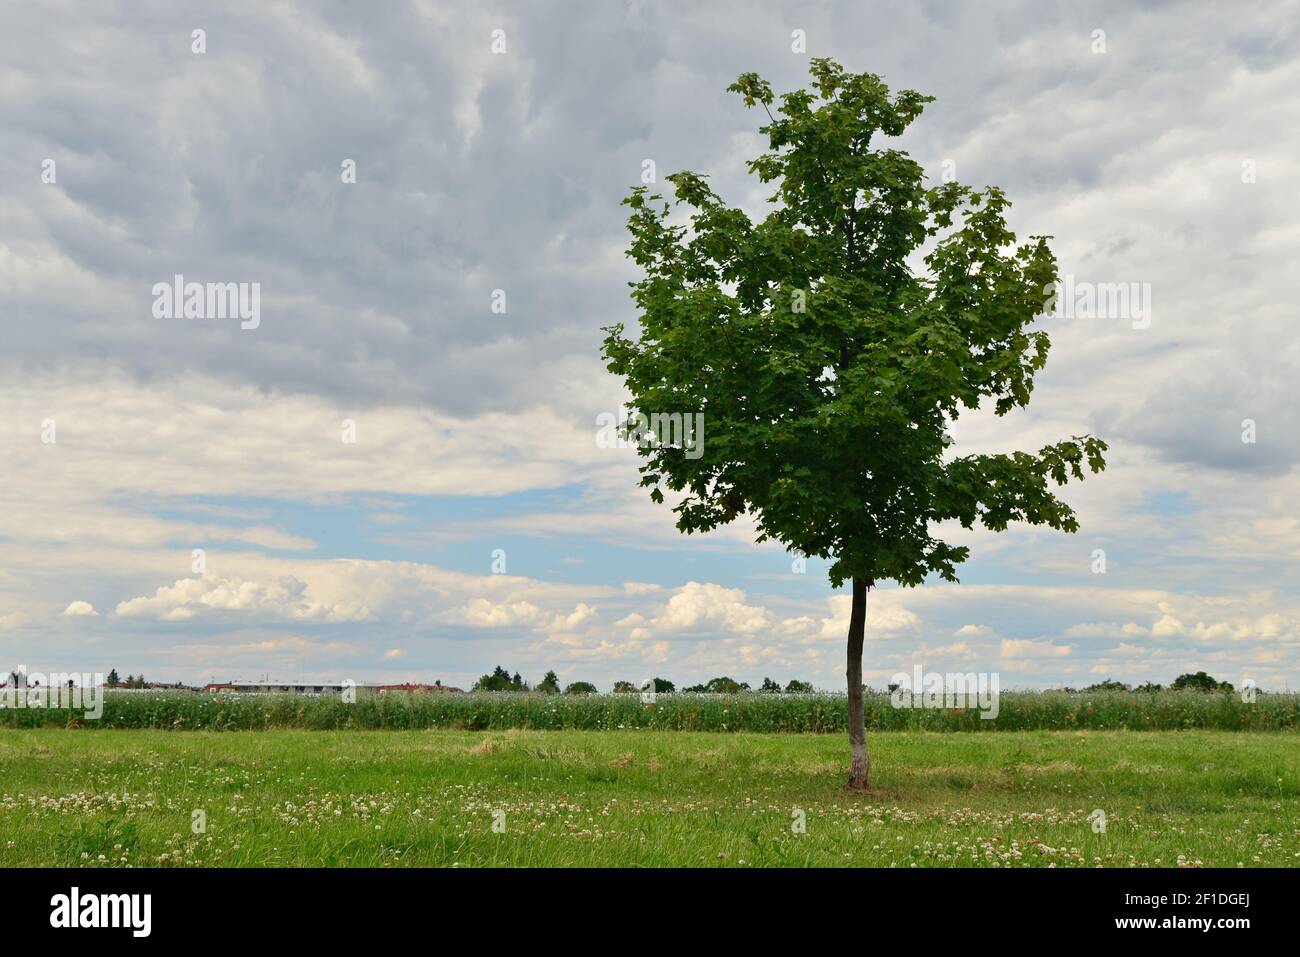 Beautiful green tree on a green lawn in the background of clouds with a shining blue sky. Green horizon field in the background with roofs of houses. Stock Photo